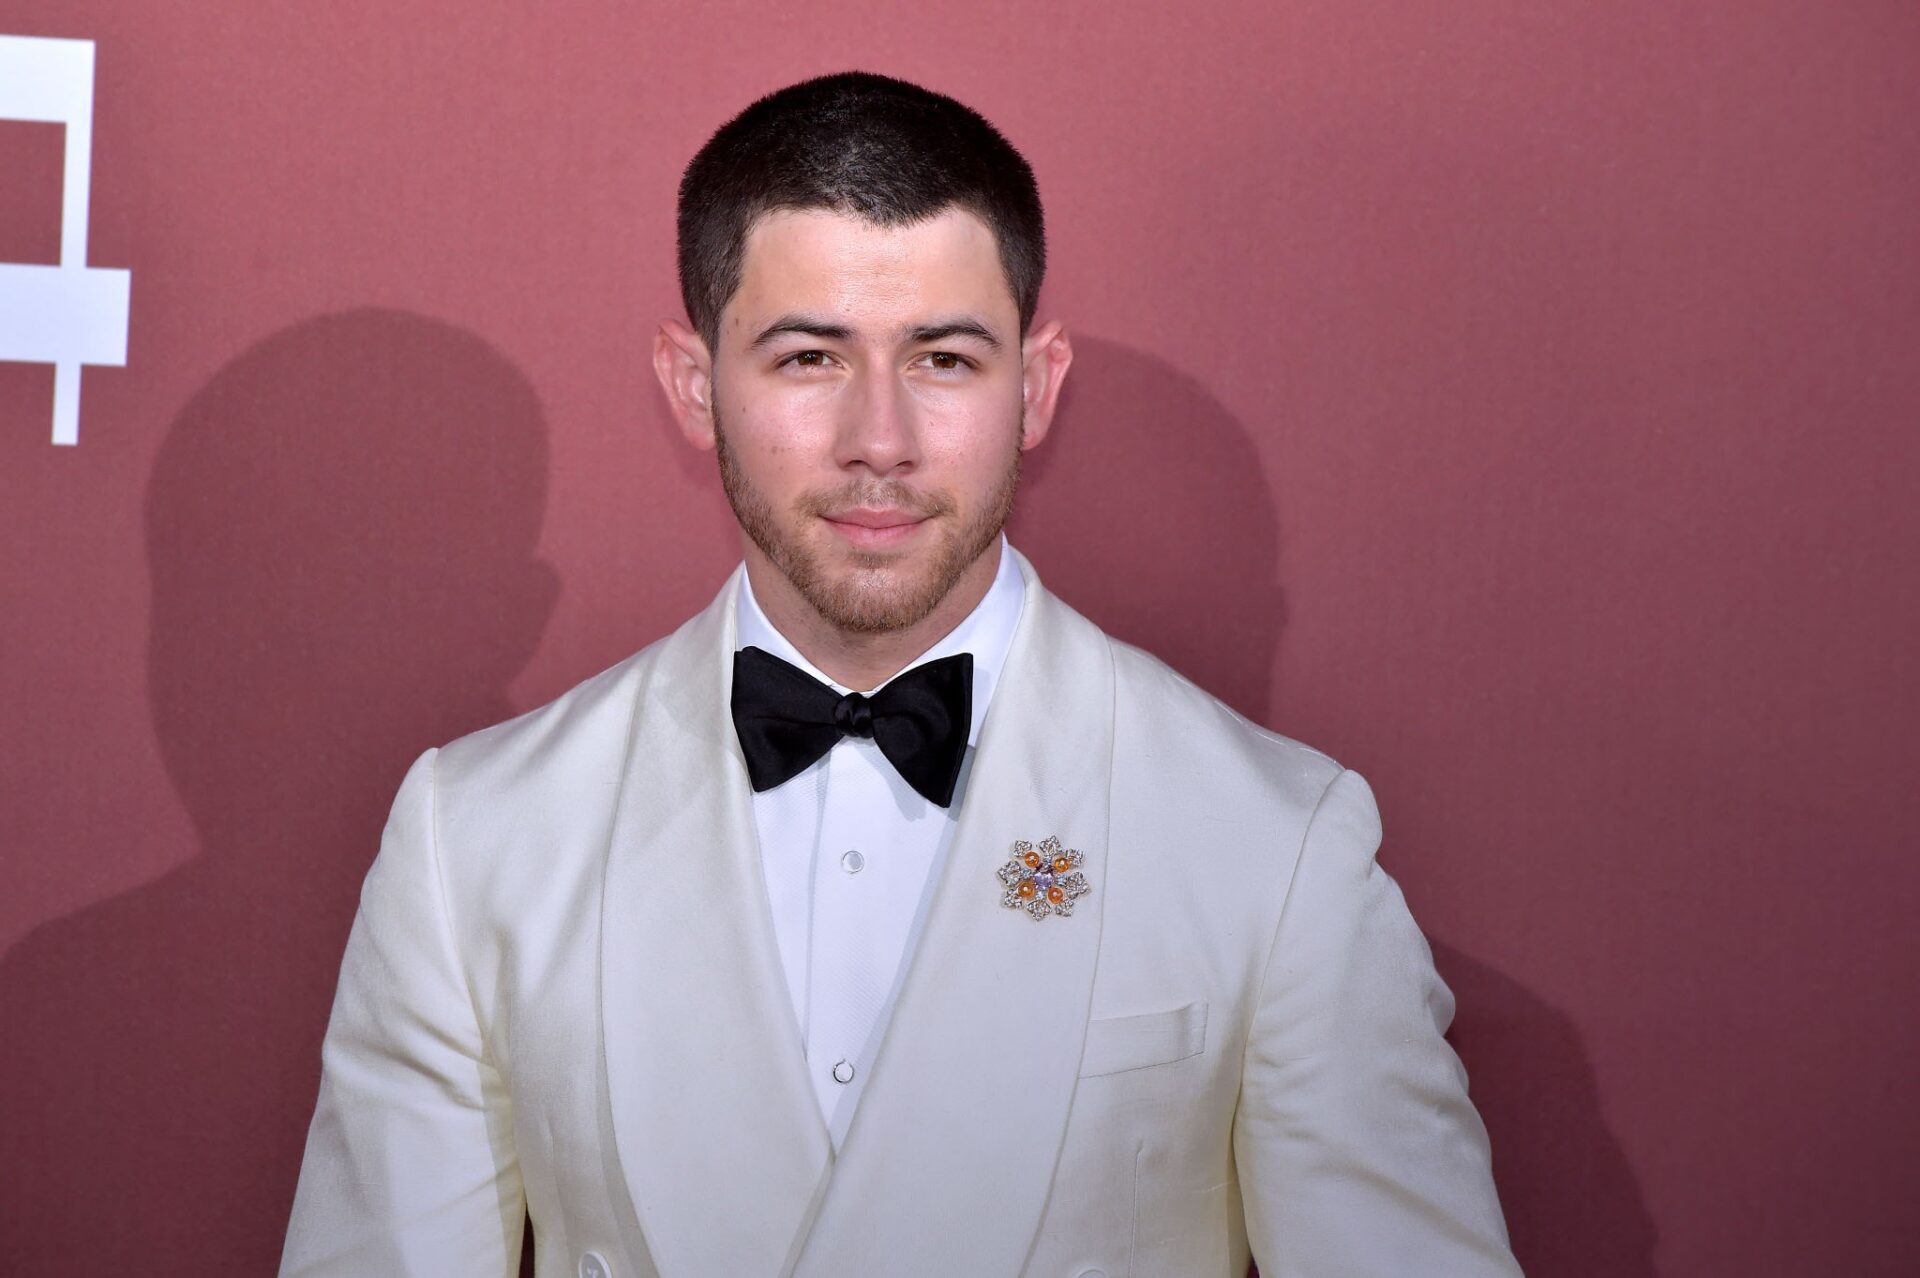 Nick Jonas Biography: Age, Net Worth, Instagram, Spouse, Height, Wiki, Parents, Siblings, Awards, Movies